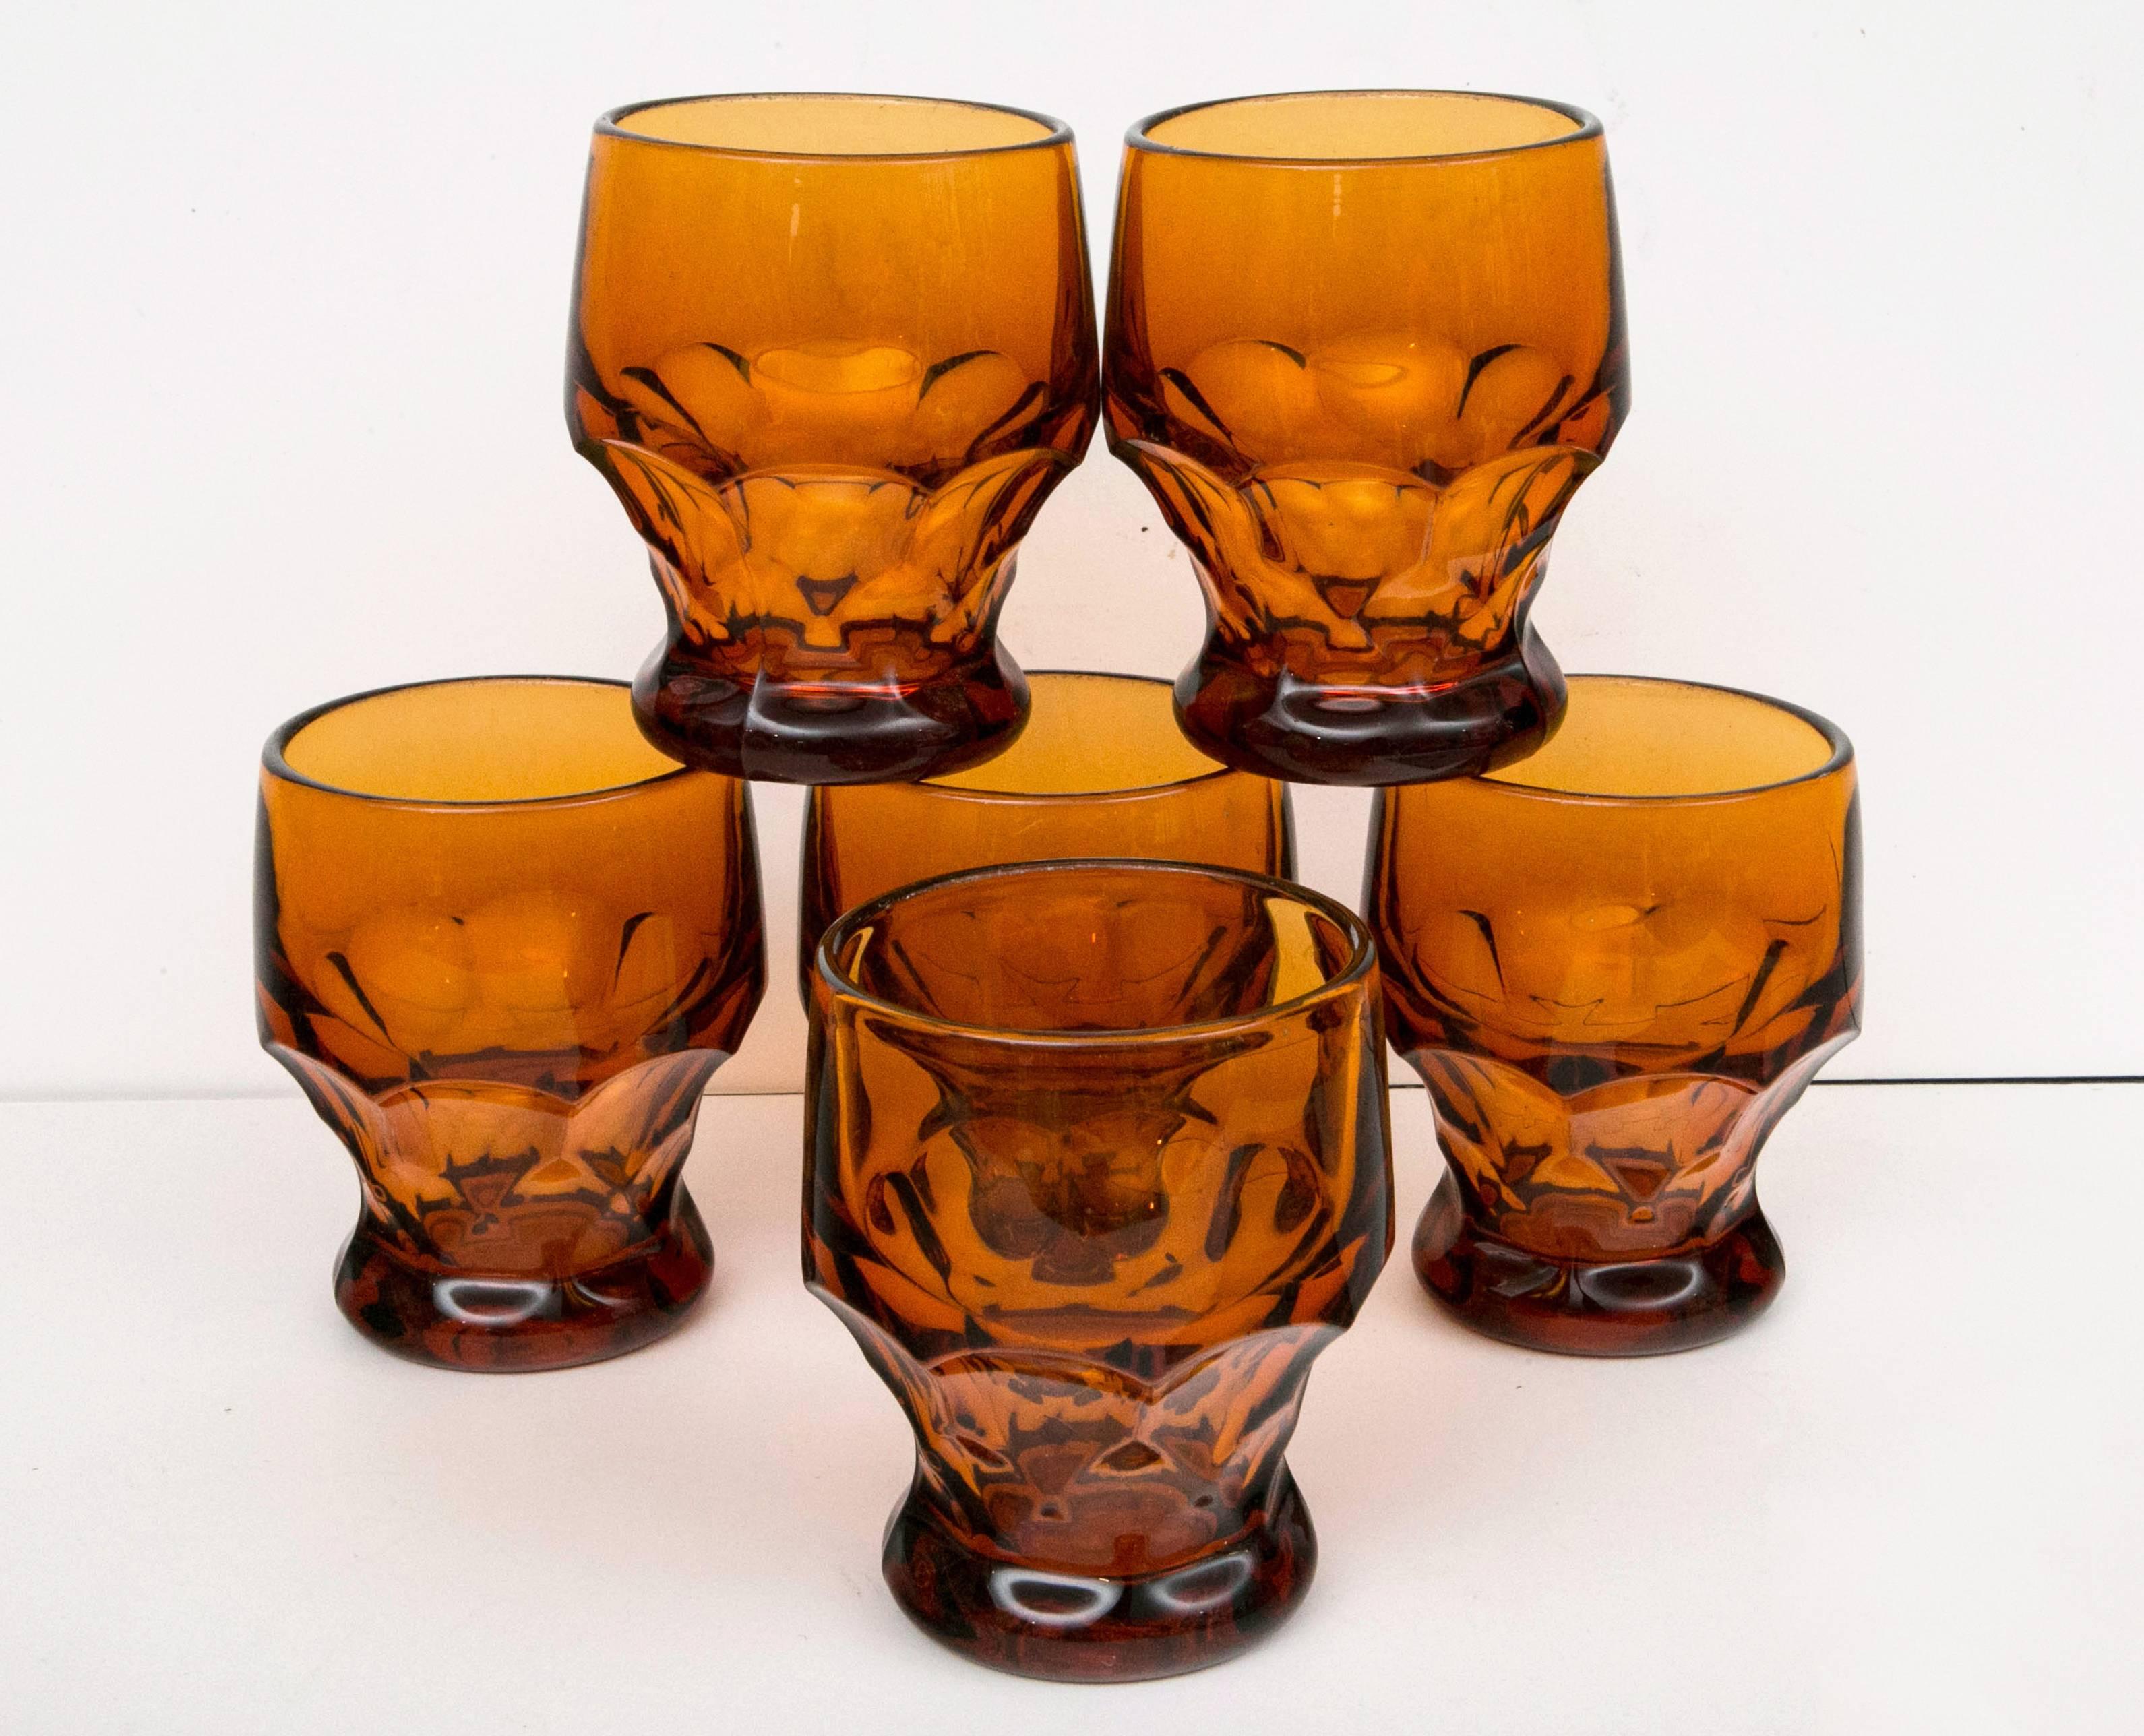 Stunning set of six amber retro/vintage Mid-Century glassware. Amber glass Hoffman House water glasses with a pleasing heft and large chunky shape, 1960s or 1970s vintage. These beauties are unmarked, and are all in very good condition. This is a